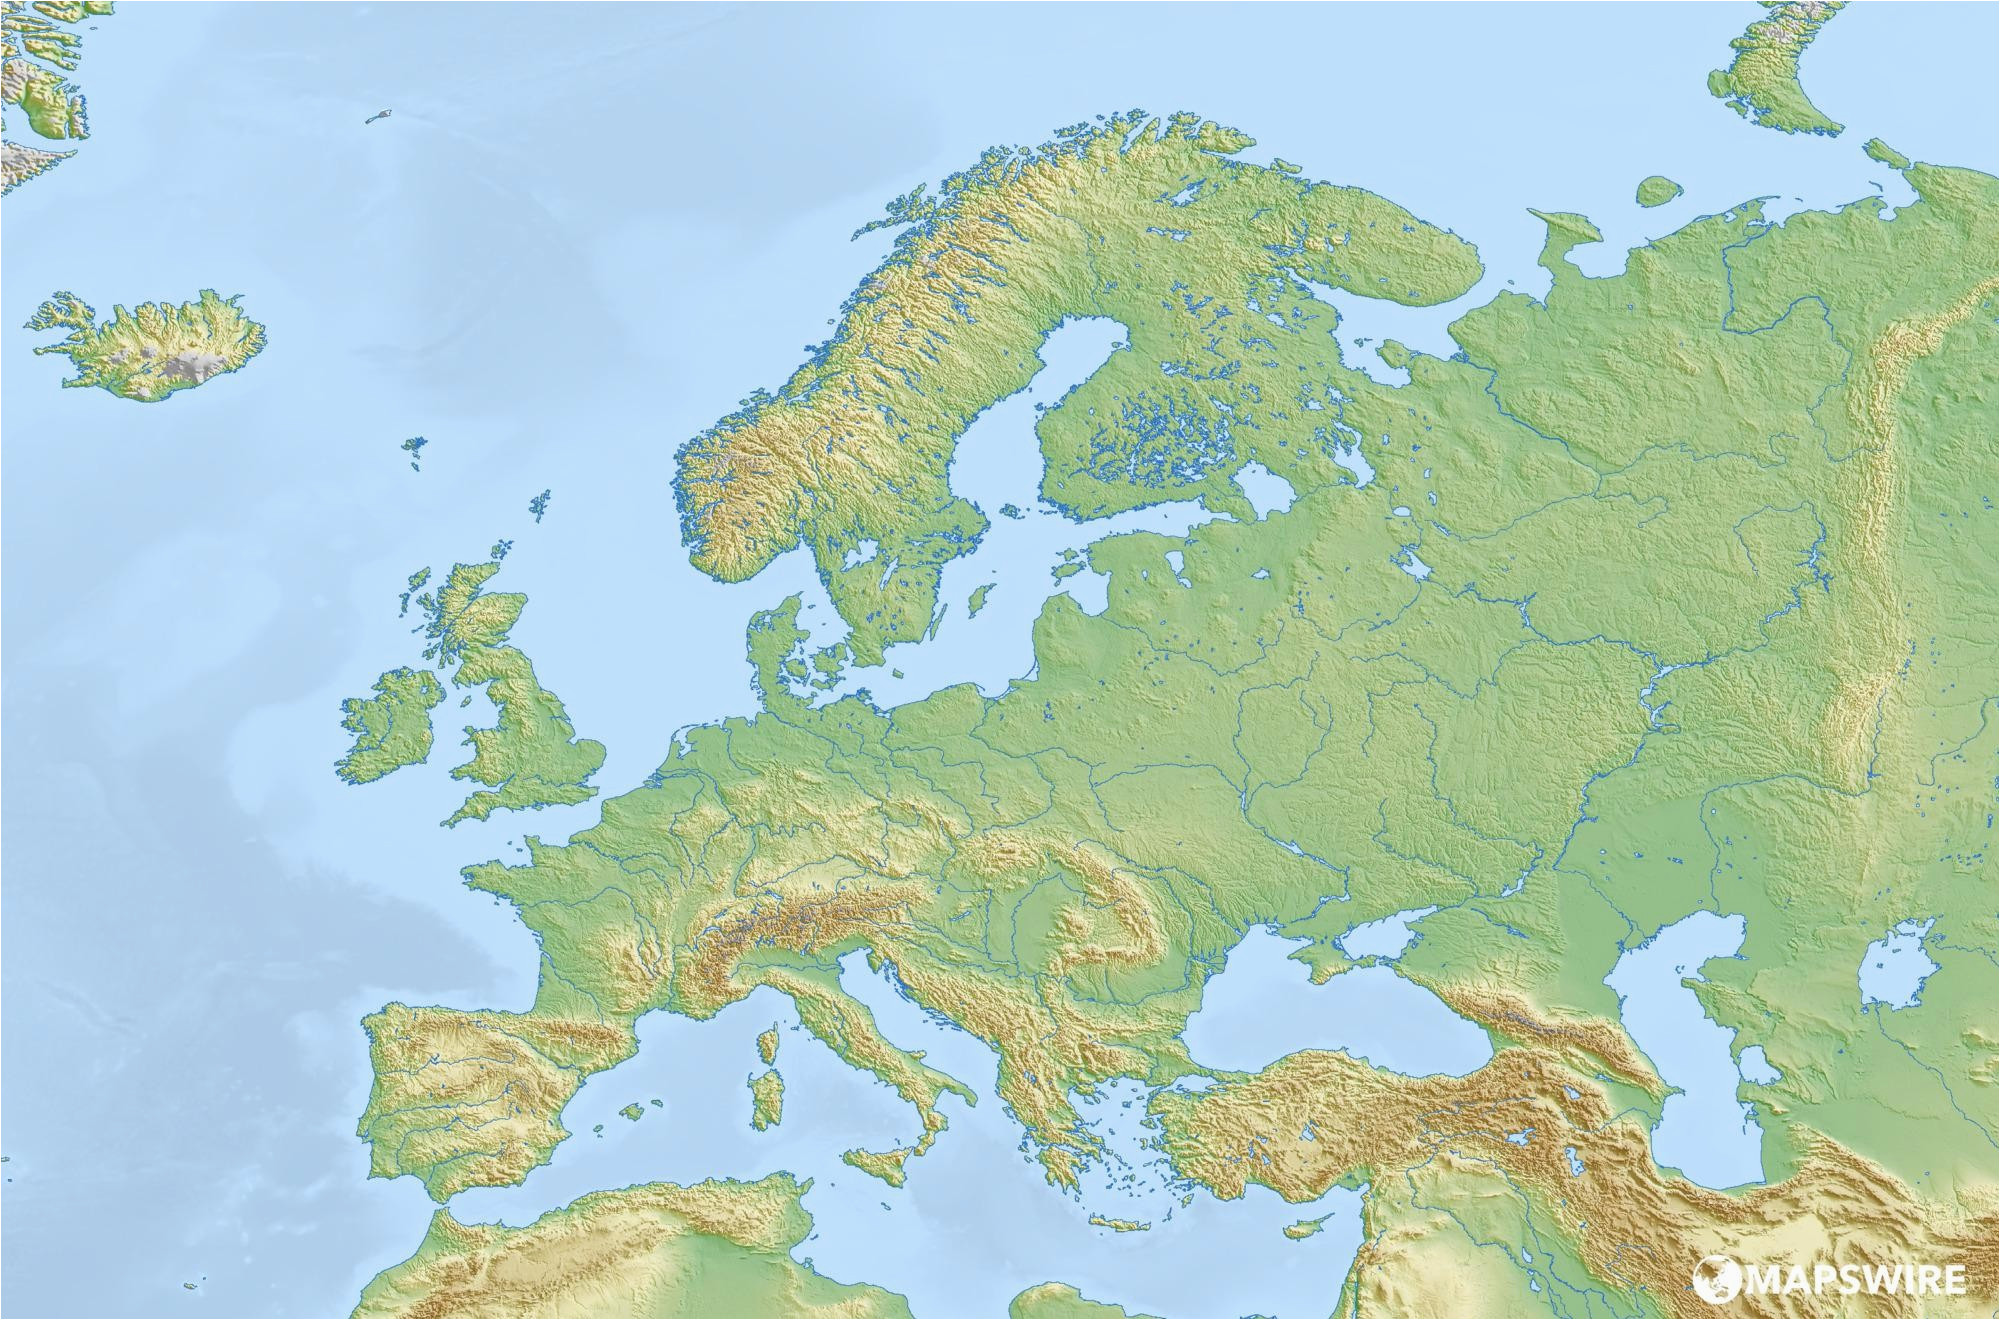 europe-physical-features-map-quiz-36-intelligible-blank-map-of-europe-and-mediterranean